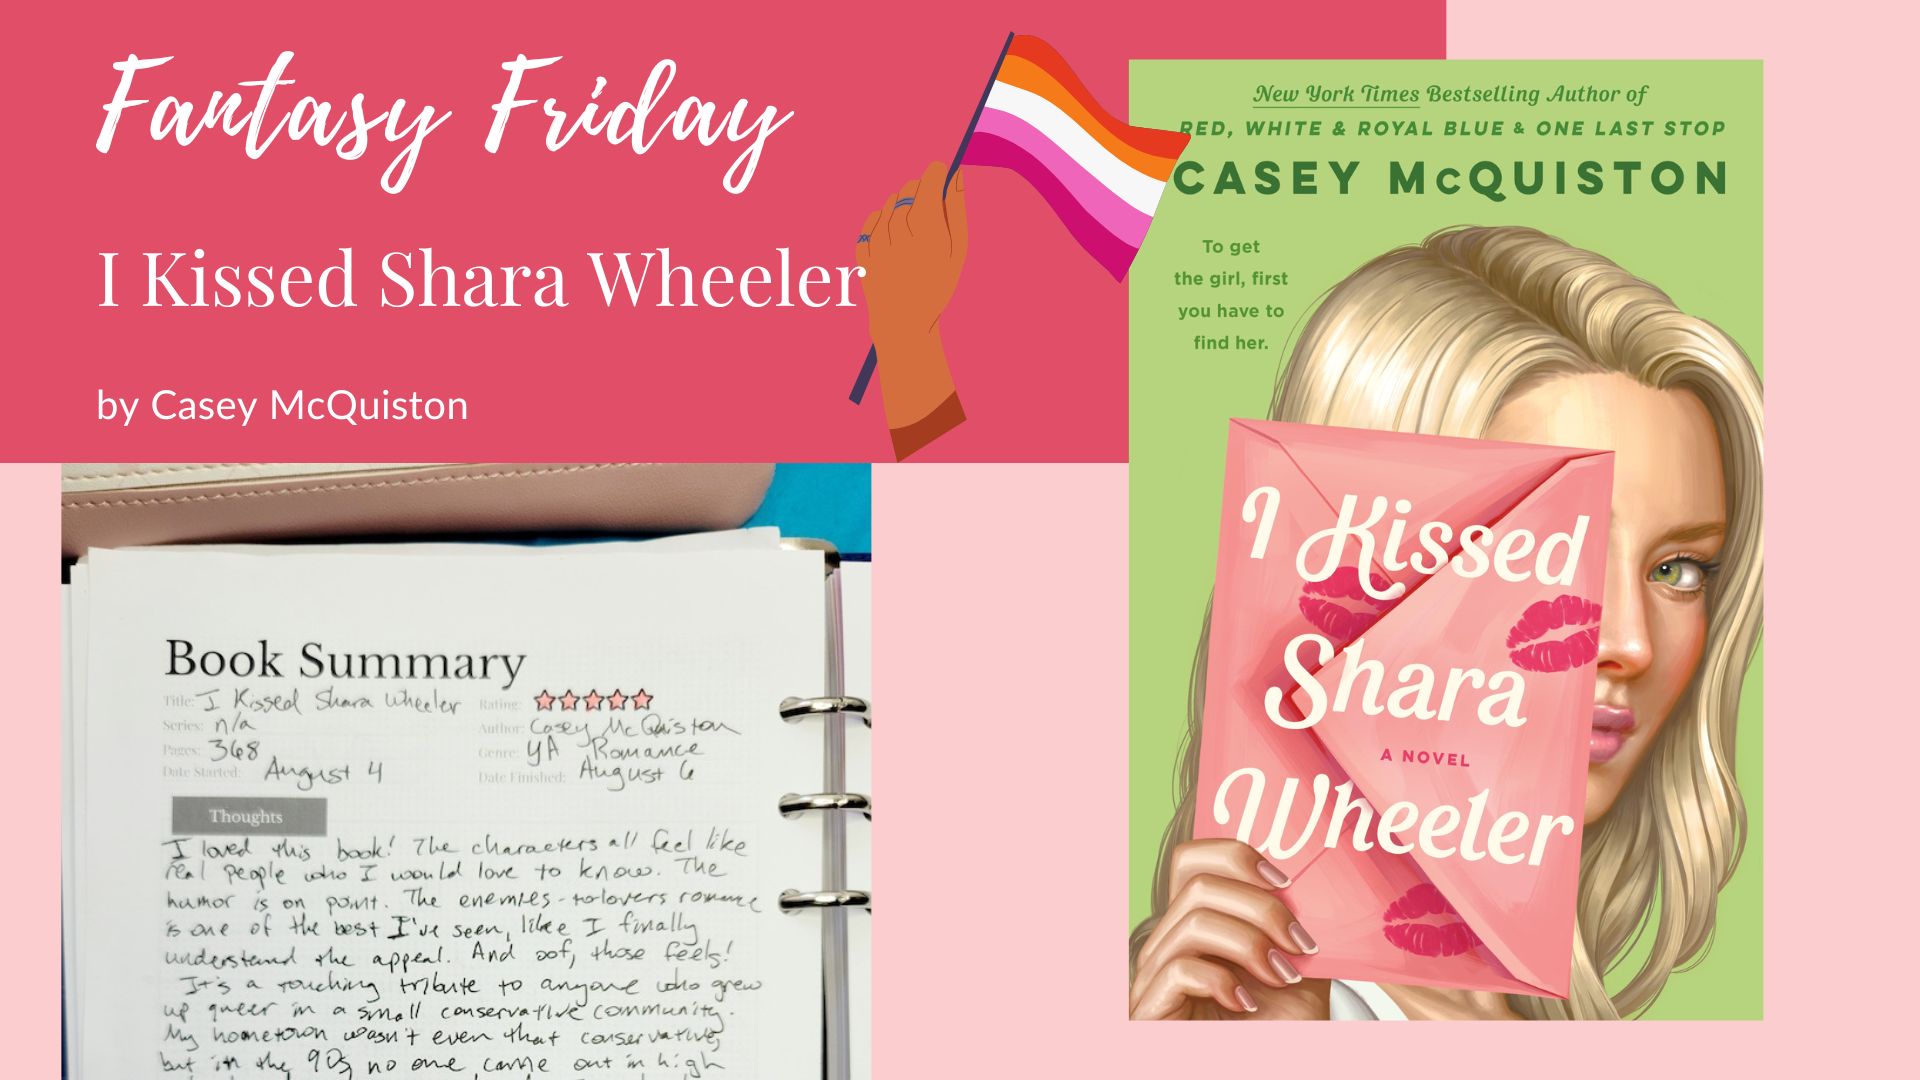 You are currently viewing Fantasy Friday: I Kissed Shara Wheeler by Casey McQuiston